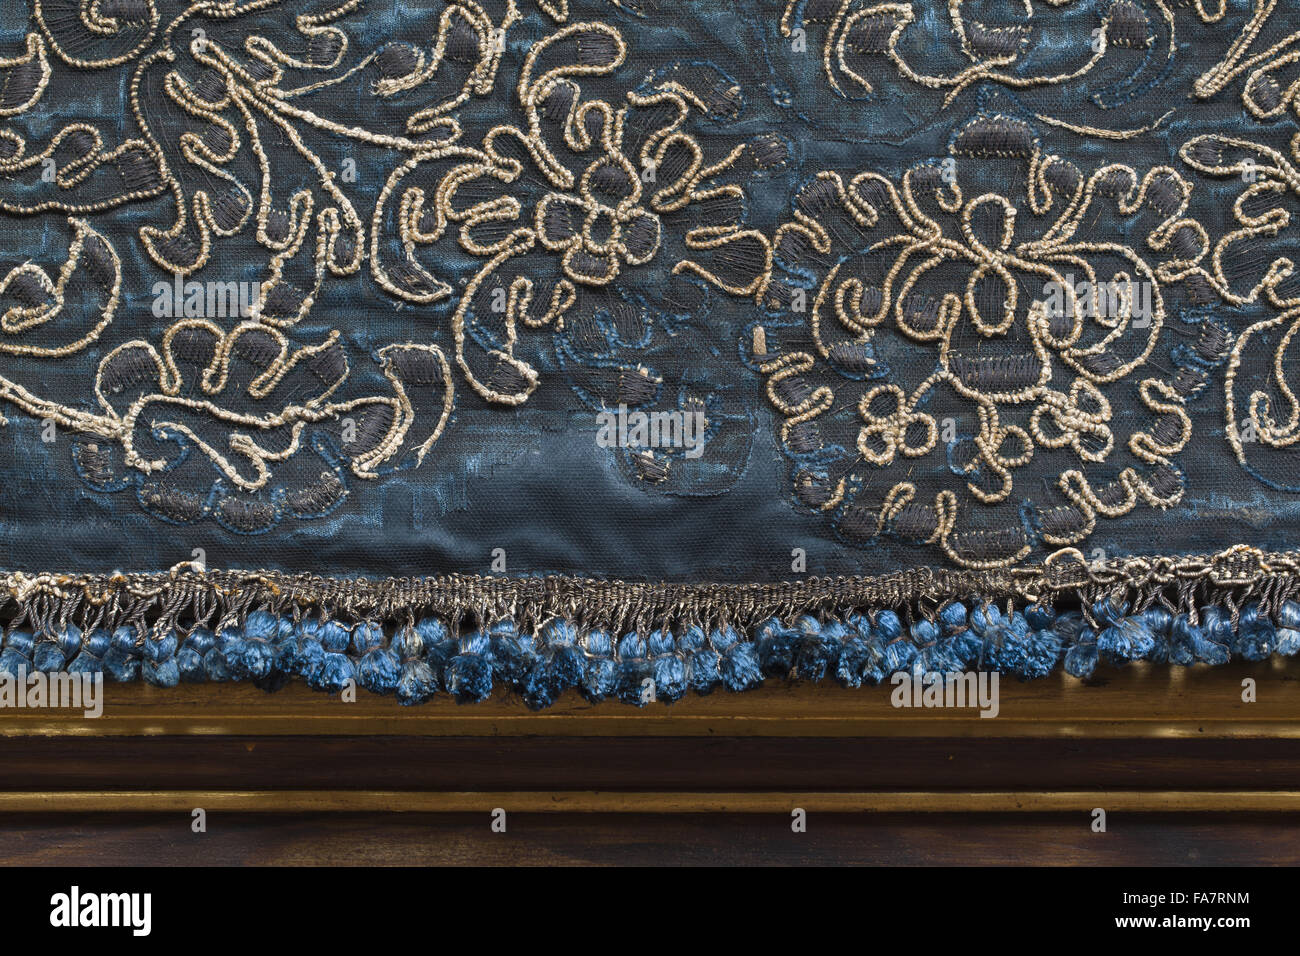 Queen's Antechamber wall hangings at Ham House, Surrey. A close view of the tassels and blue silk velvet borders embroidered with silver gilt threads. Stock Photo